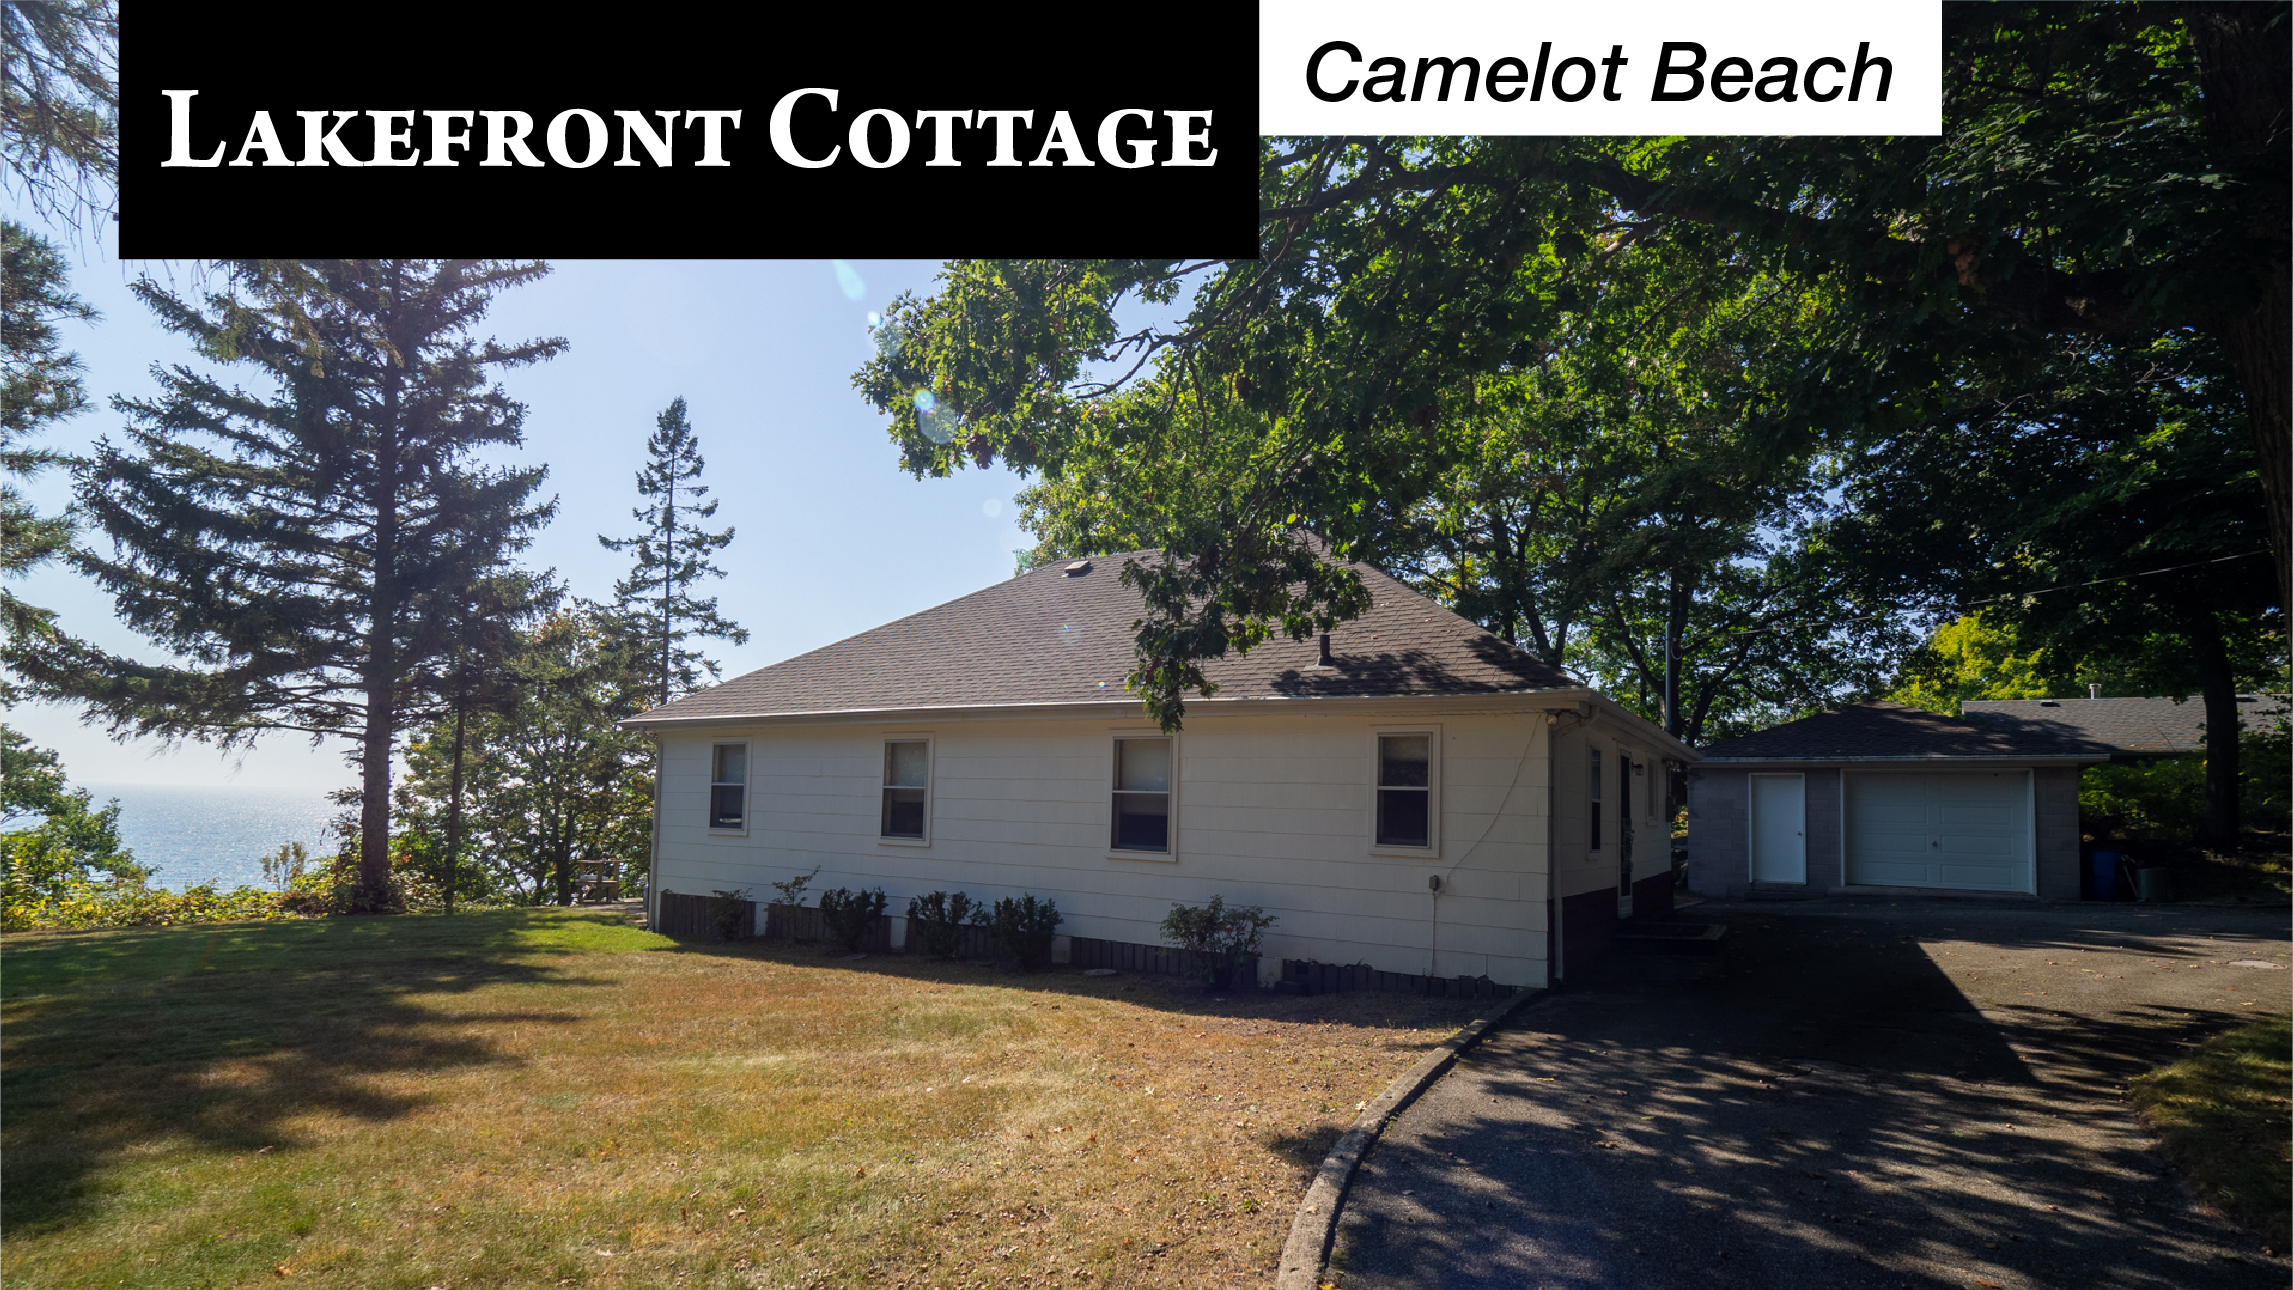 lakefront cottage banner with camelot beach flag on 10209 camelot dr wainfleet for sale by ruzycki real estate